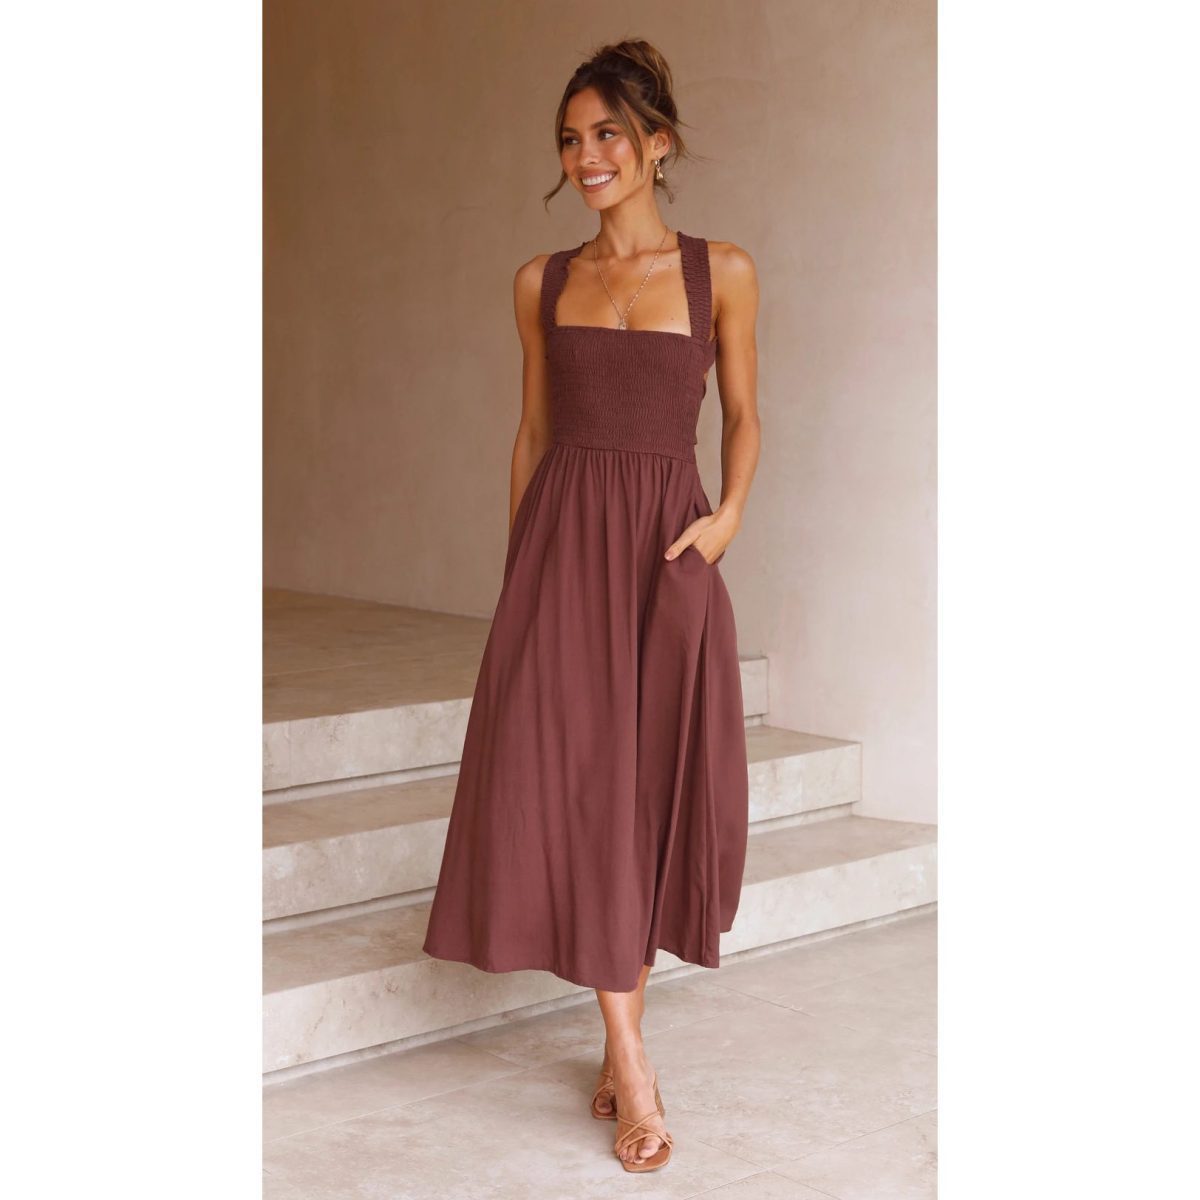 Solid Color Cotton Linen Sleeveless Dress in Dresses